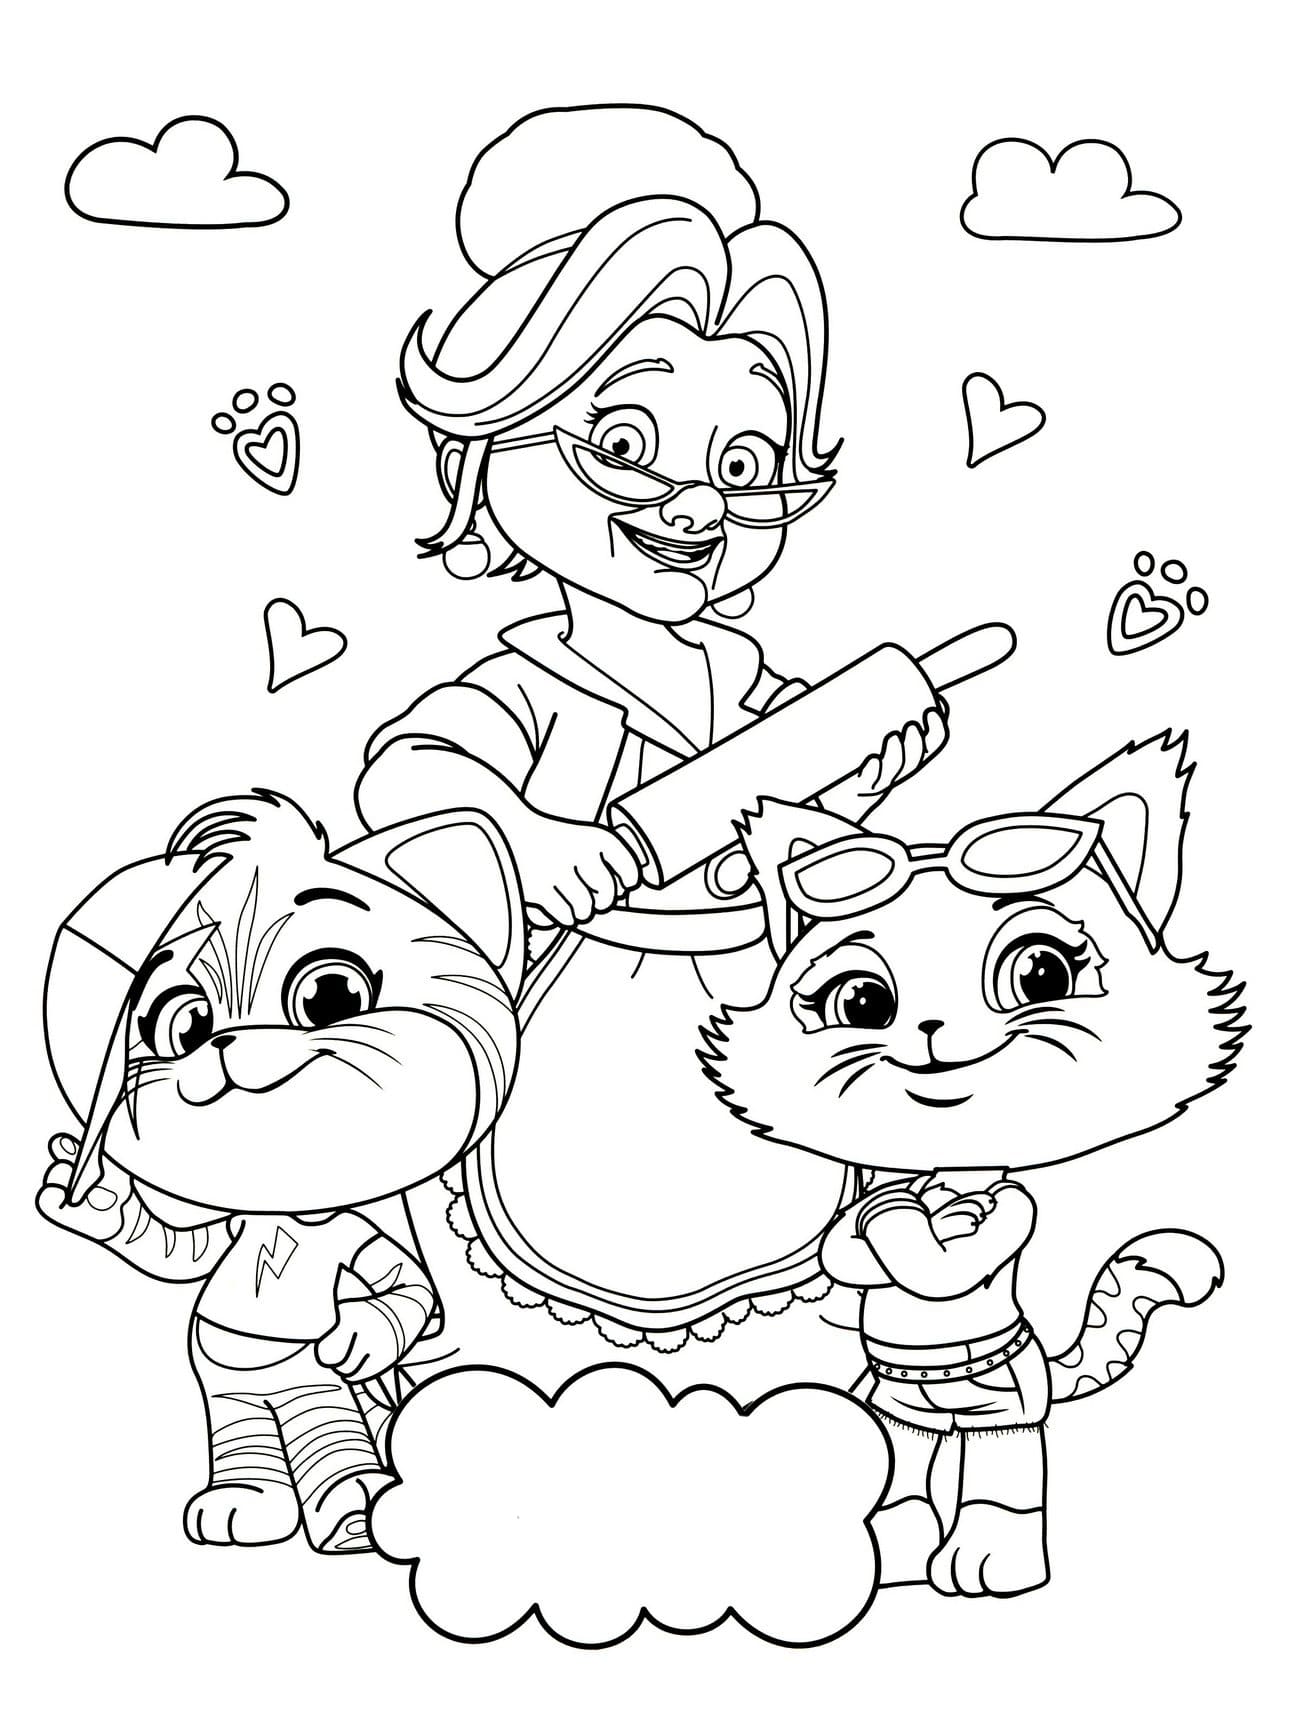 44 Cats Coloring Pages Printable Coloring Pages